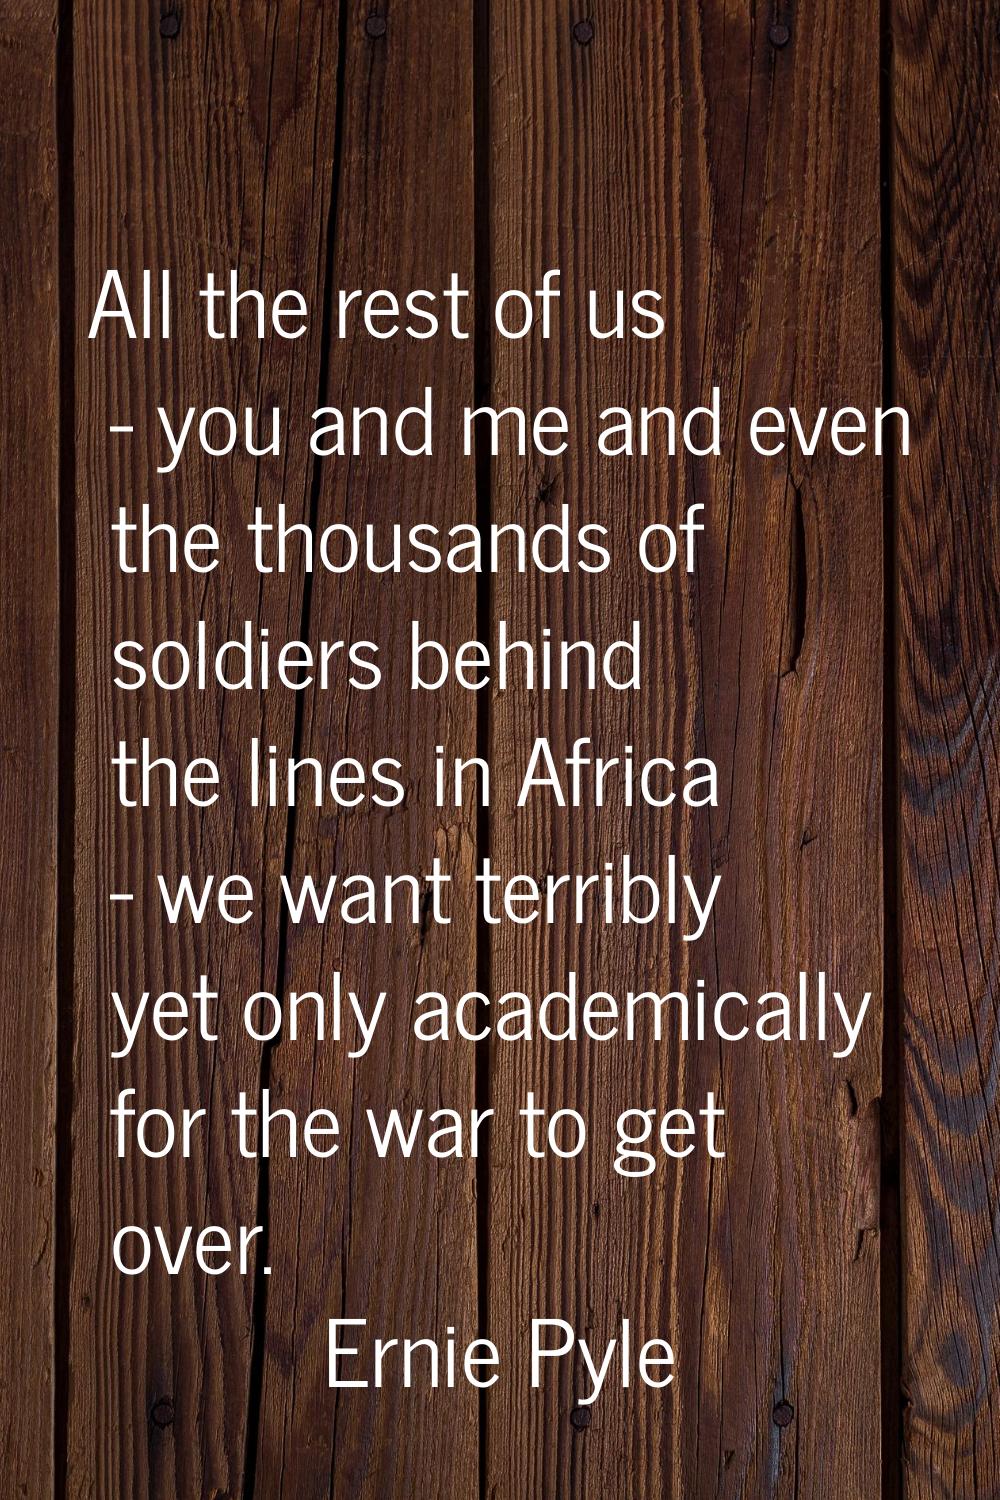 All the rest of us - you and me and even the thousands of soldiers behind the lines in Africa - we 